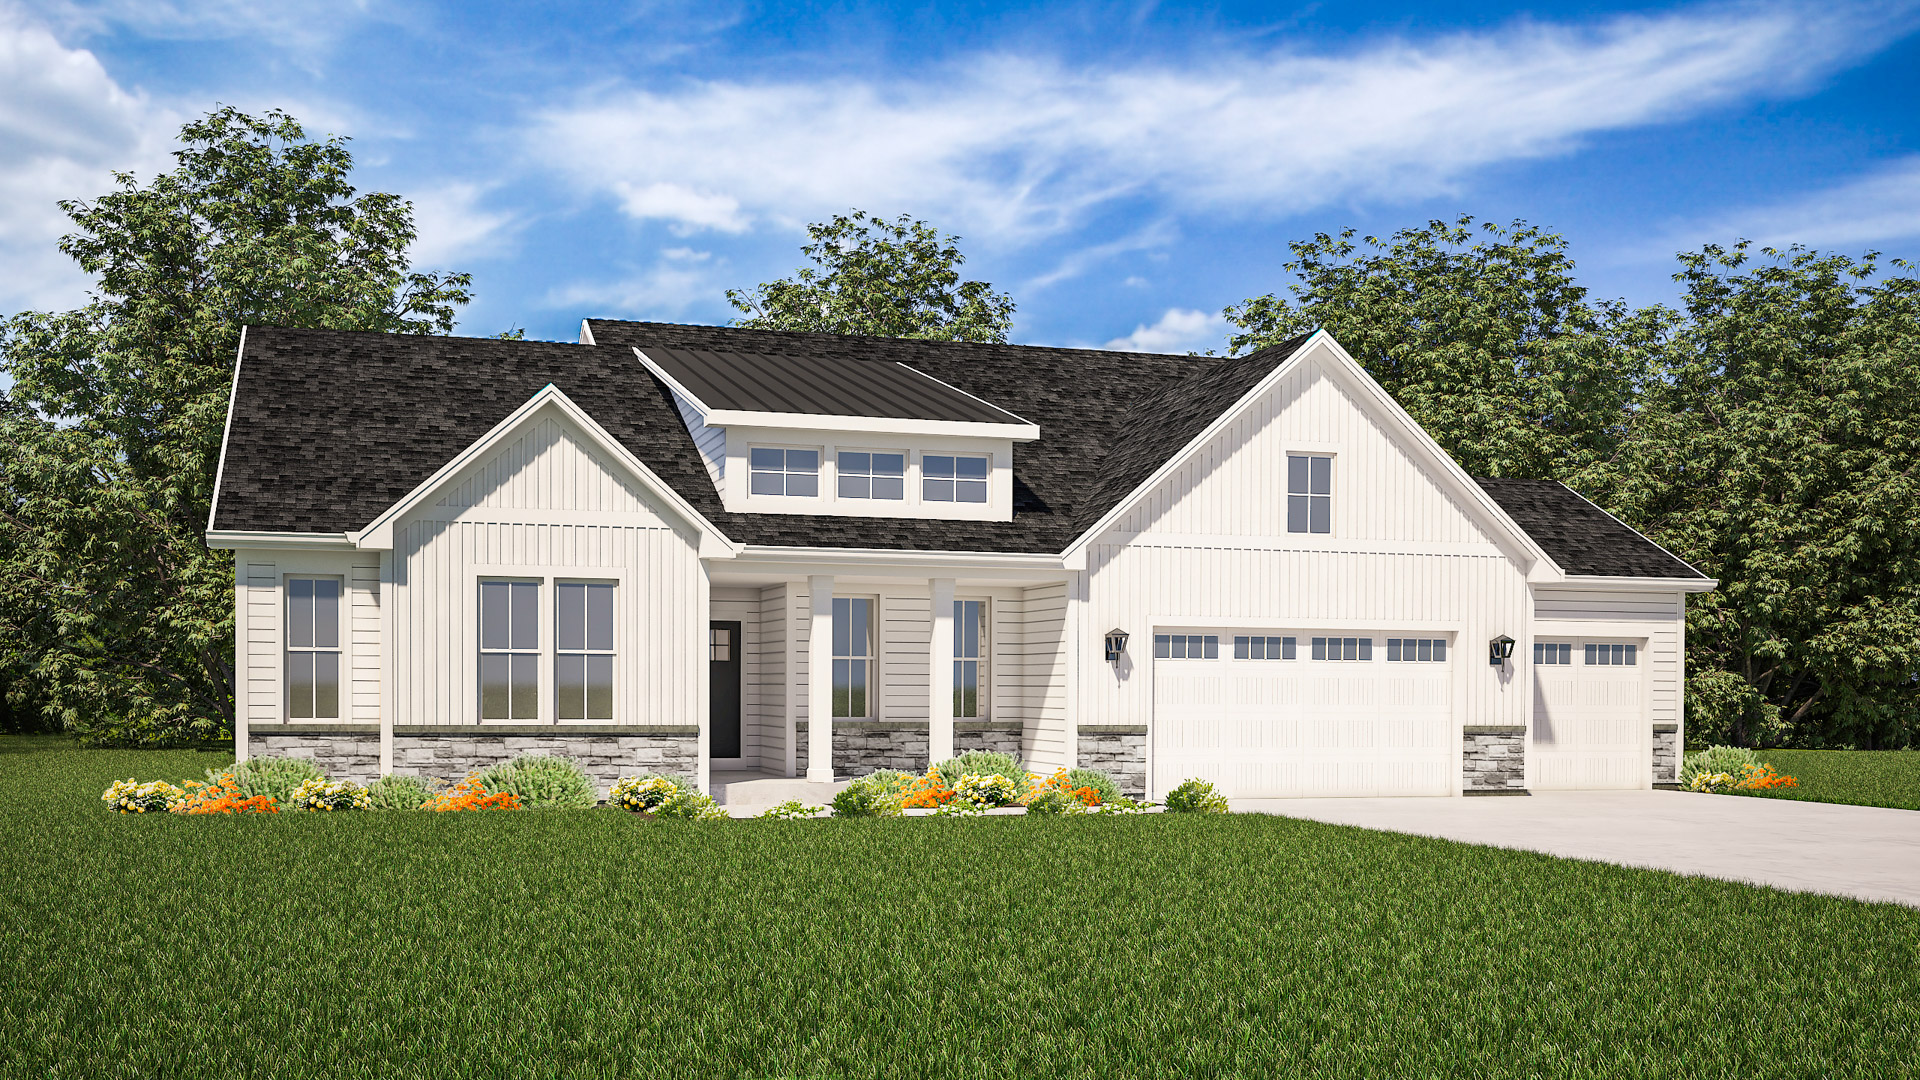 The Elsa Home Rendering Stepping Stone Homes Wisconsin